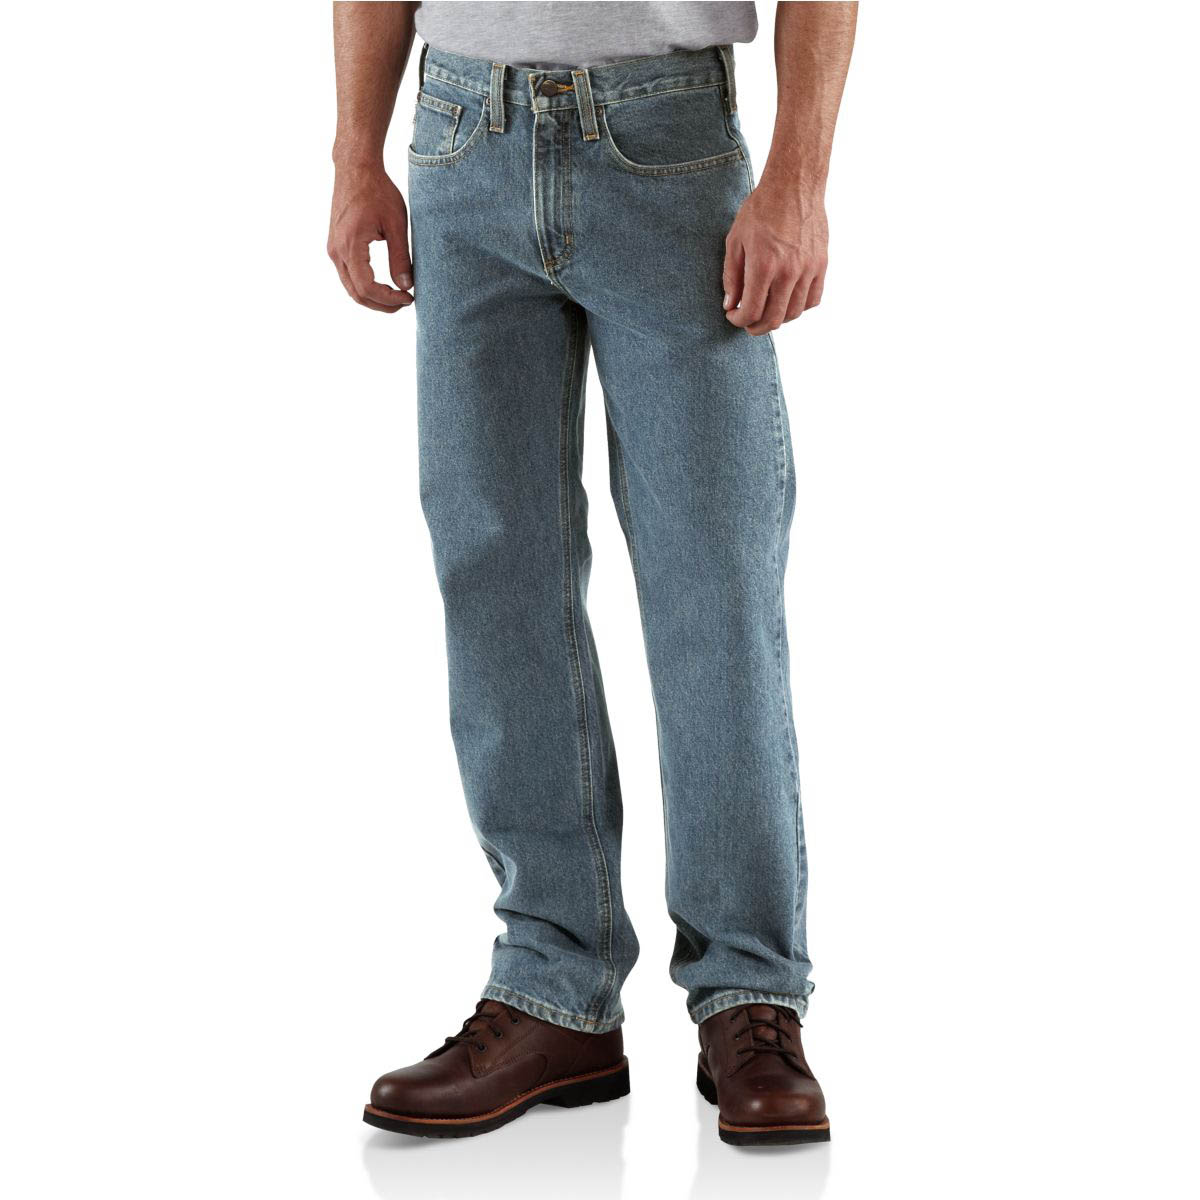 Carhartt Mens Traditional Fit Jean Straight Leg Discontinued Pricing